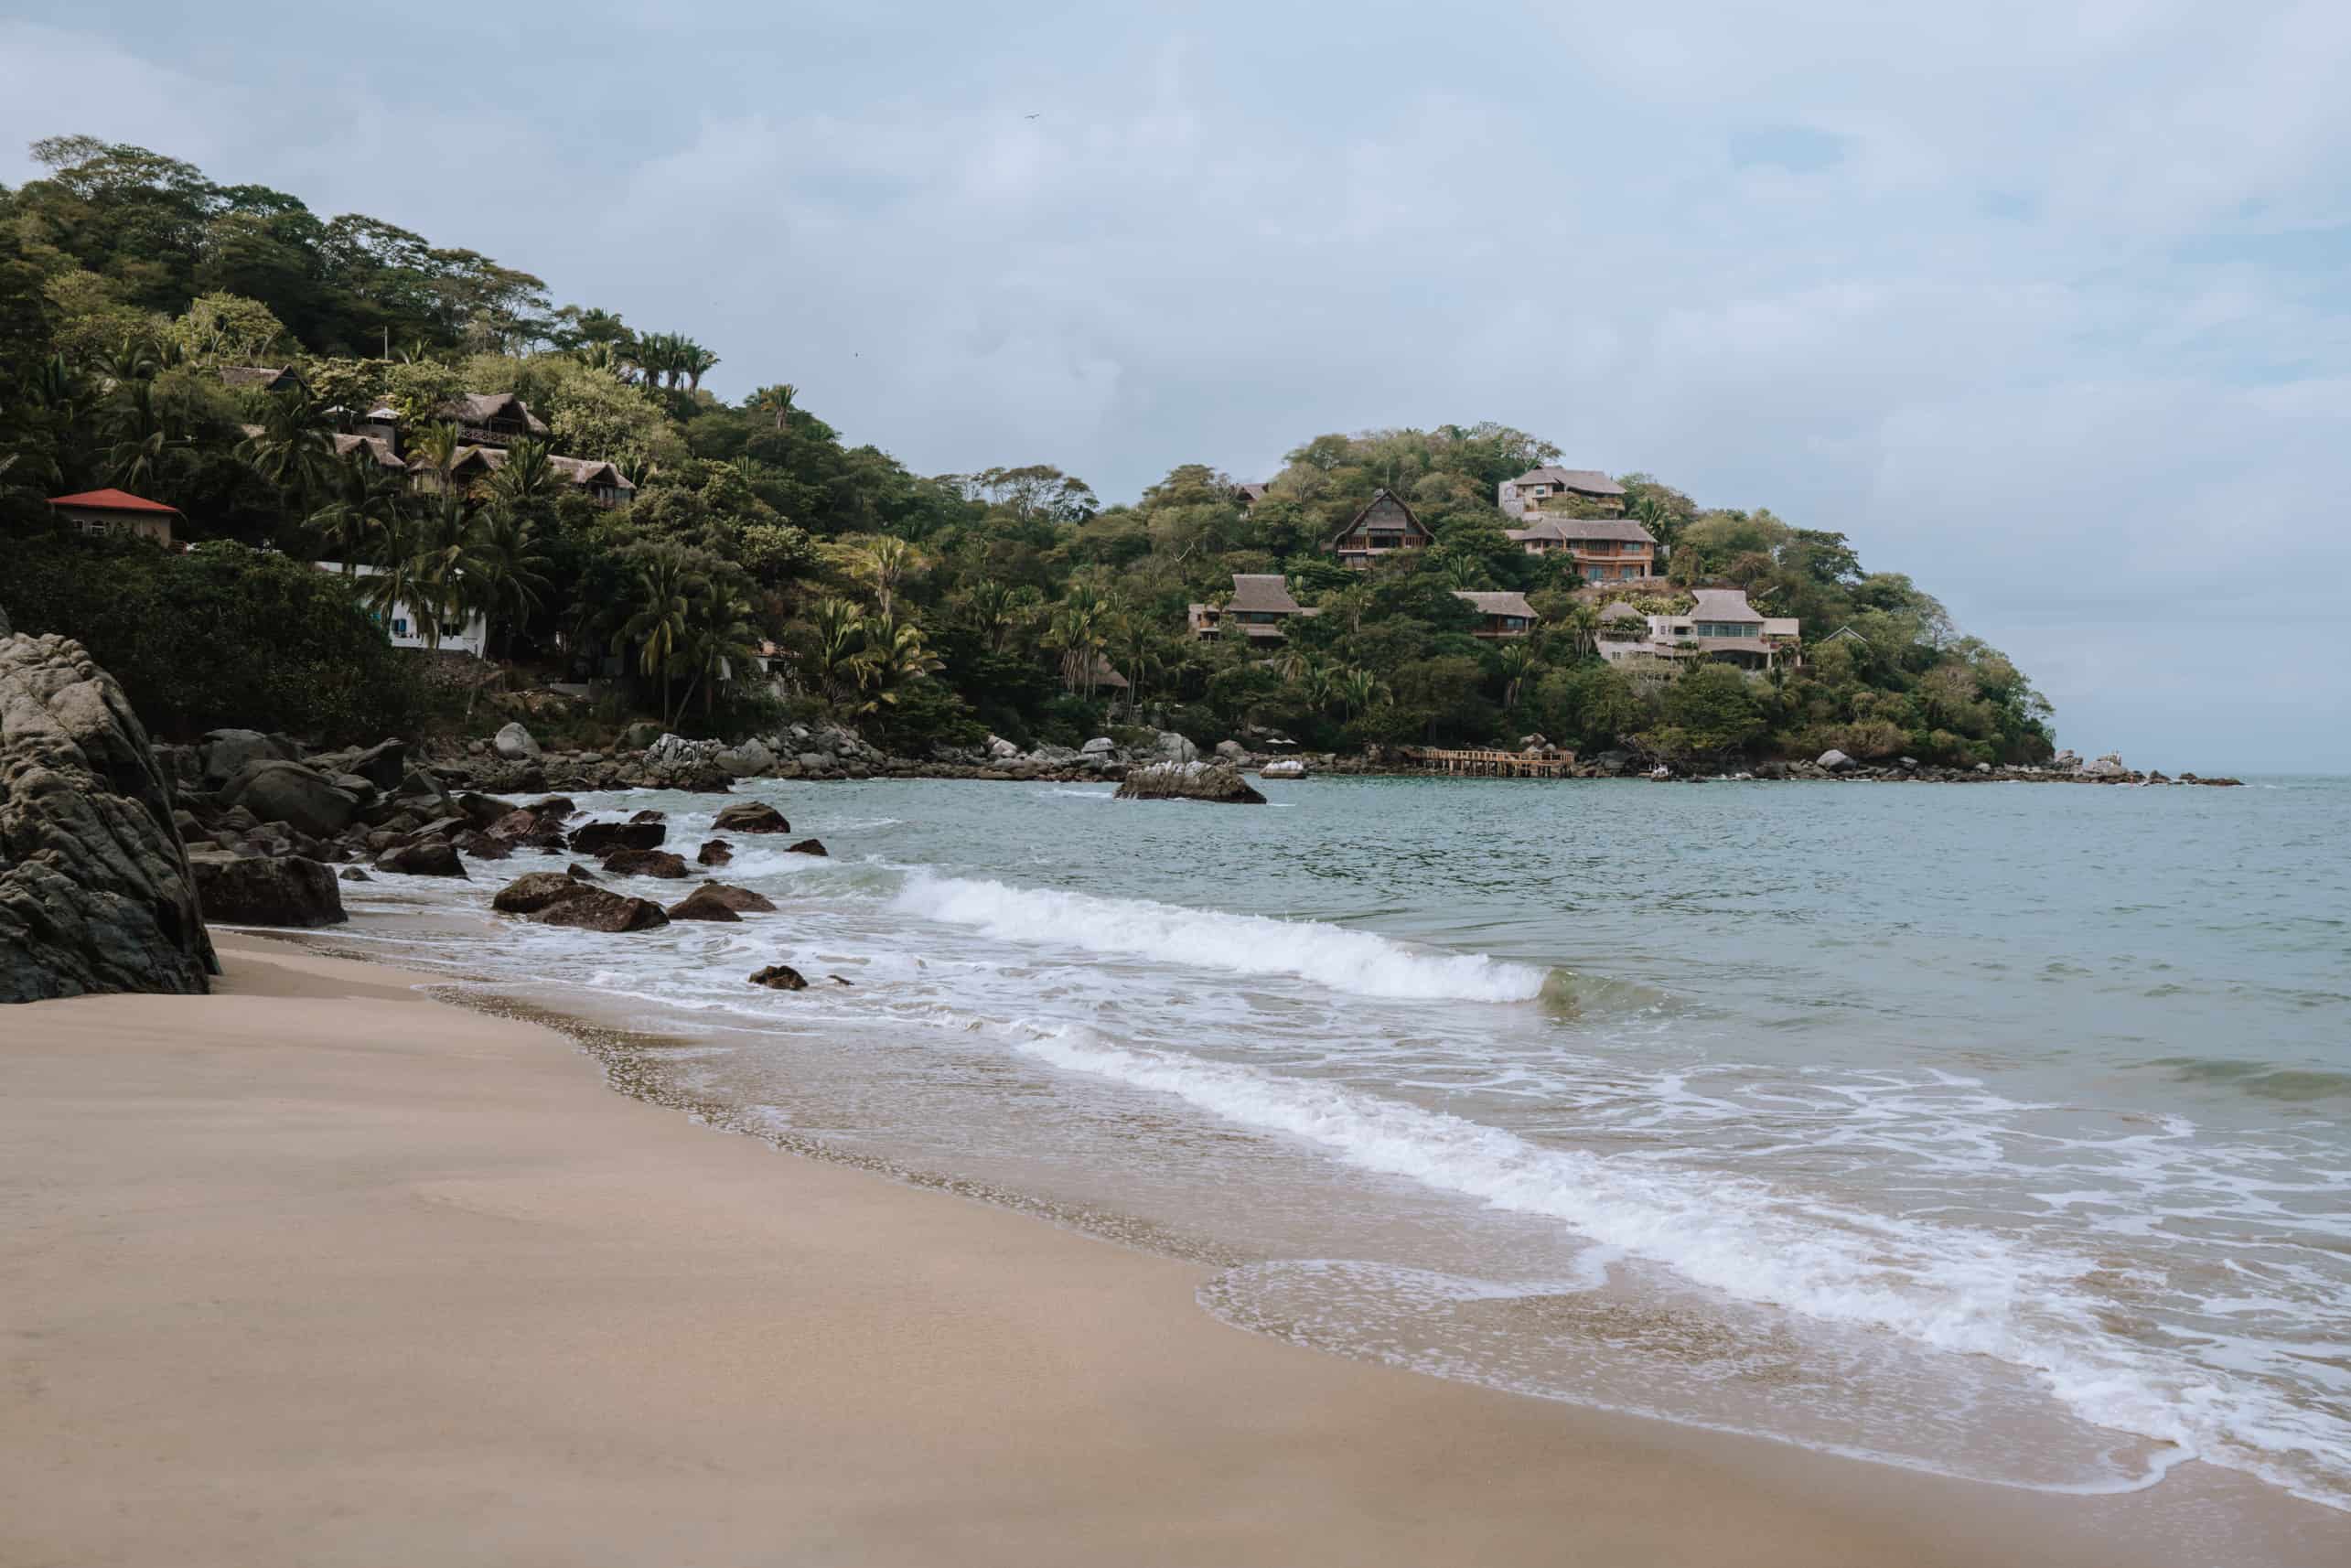 A rocky Sayulita beach with trees in the background.